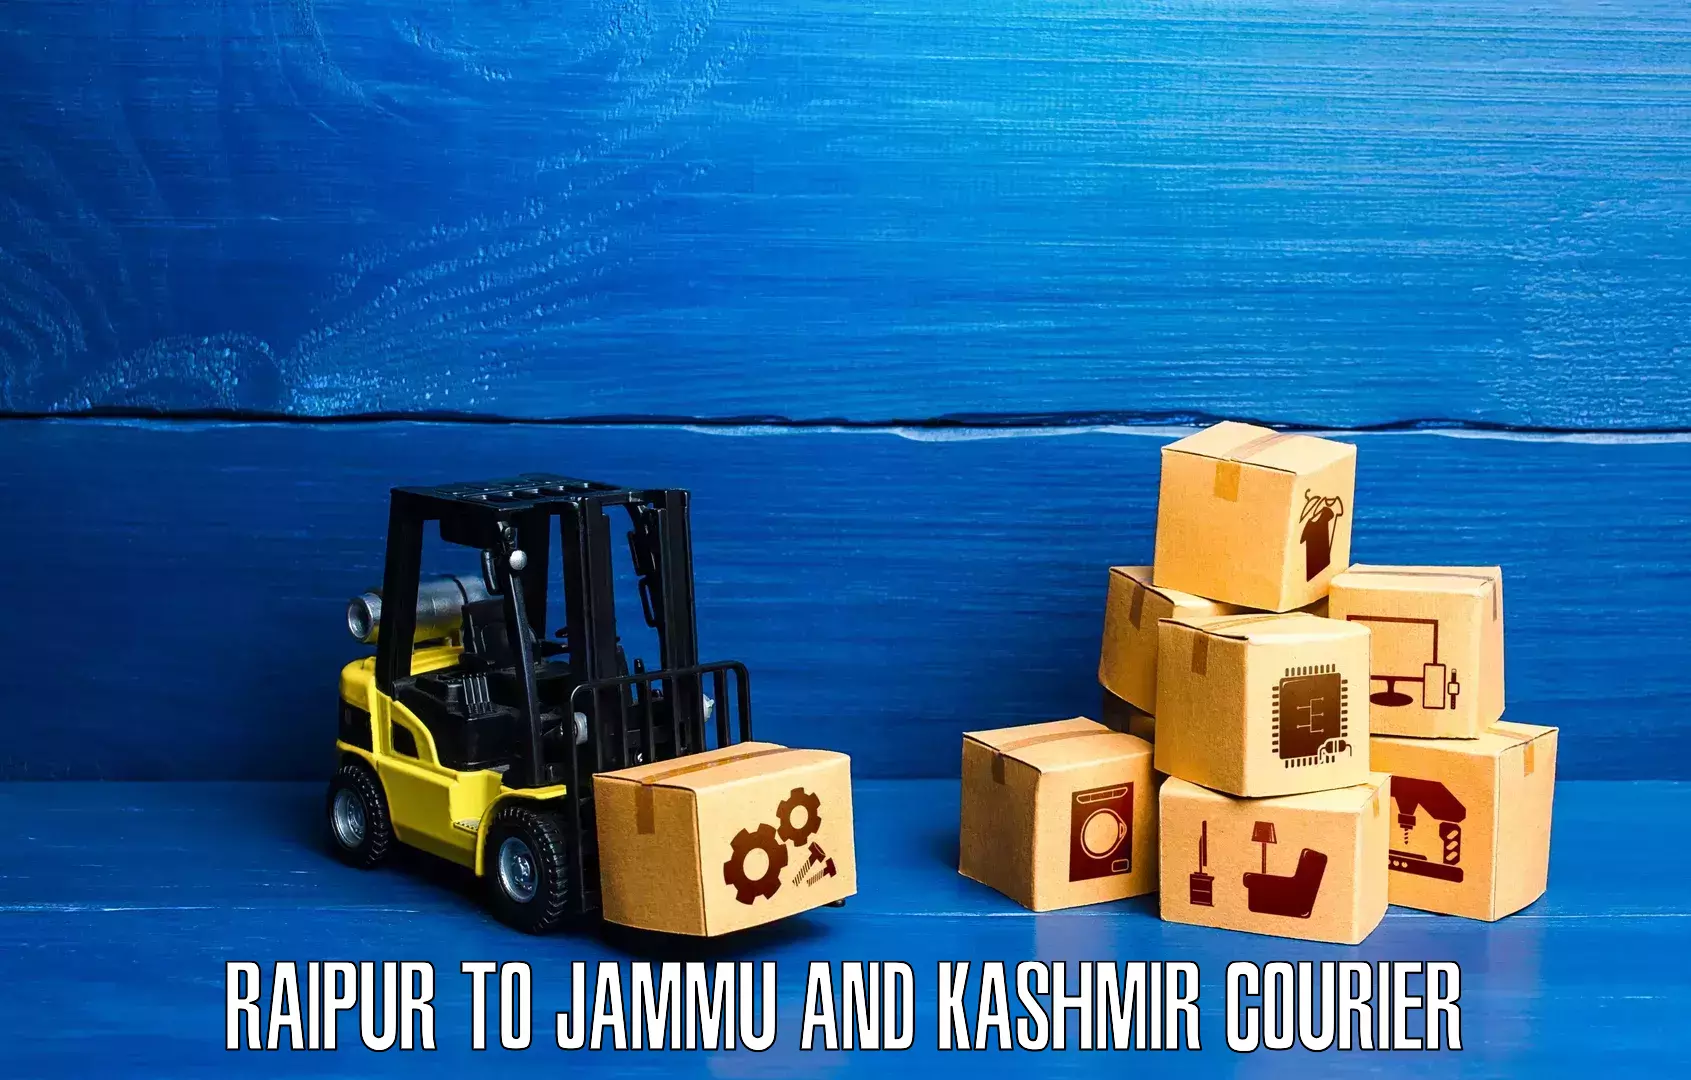 Courier service innovation Raipur to Baramulla